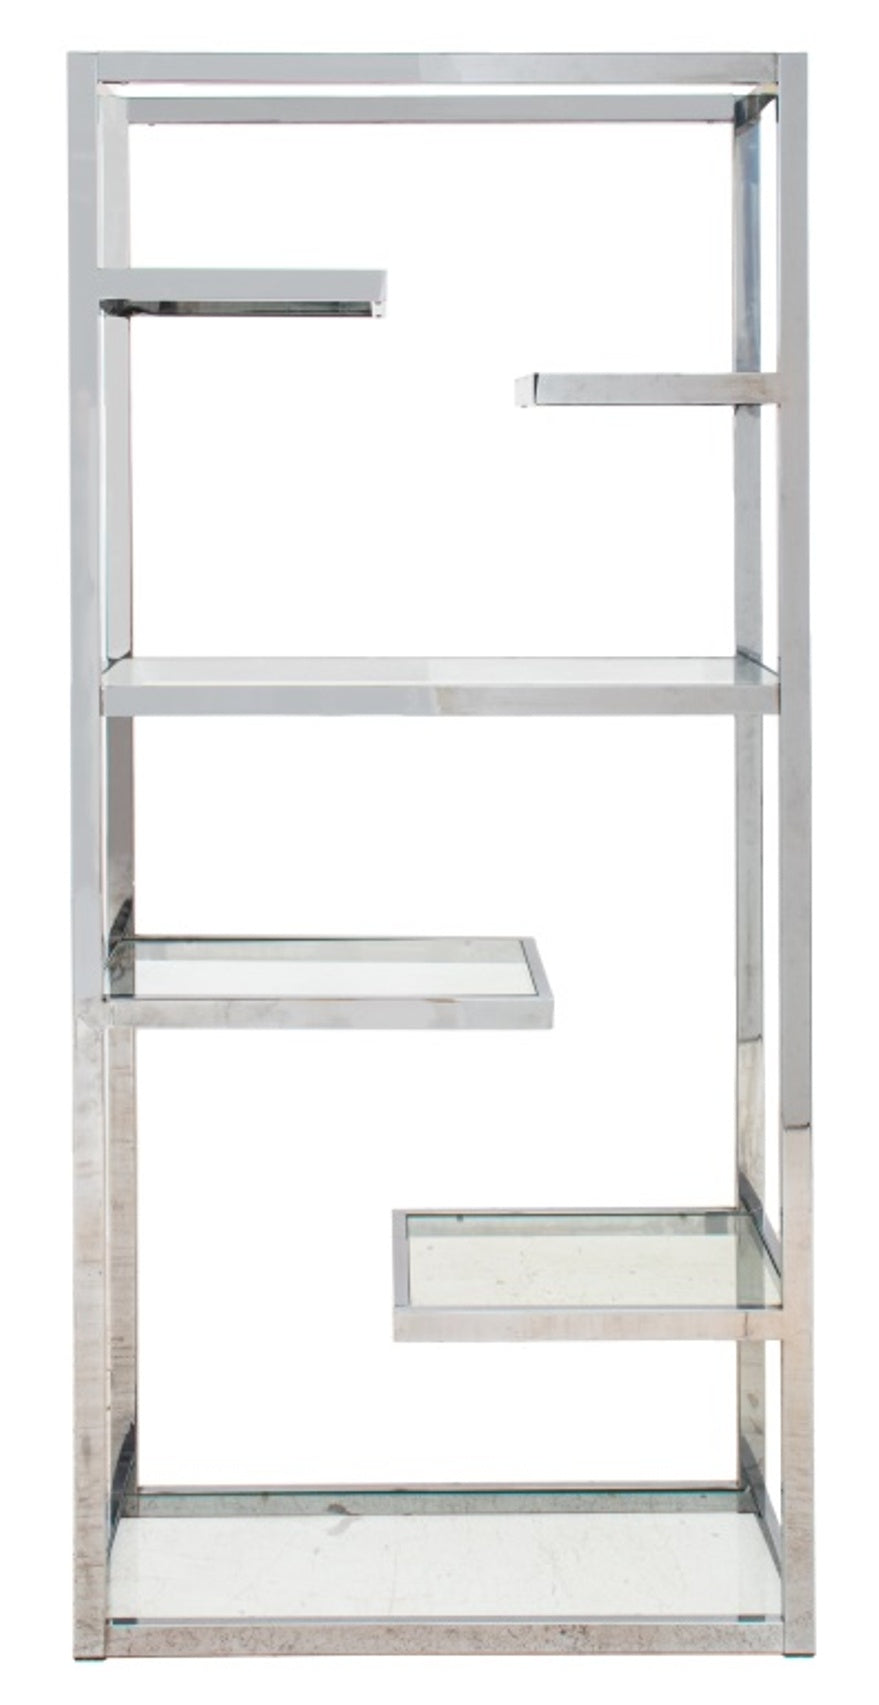 Brass etagere with smoke coloured glass shelves by Romeo Rega on